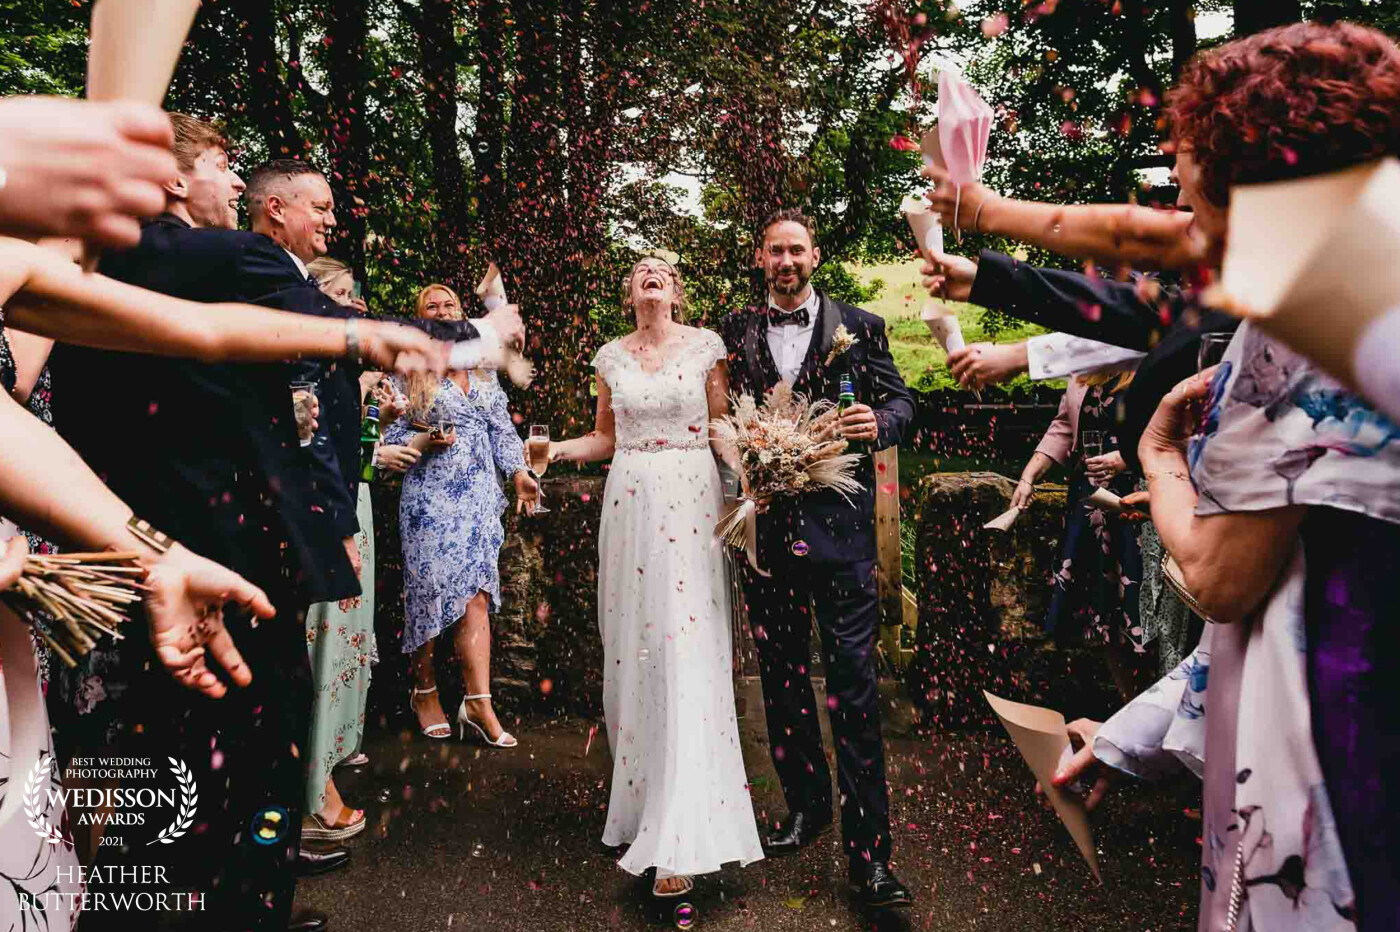 Lyndsey and Ashley were the first couple to get married at the beautiful new wedding venue Ponden Mill near Haworth in Yorkshire. They had had to postpone their day due to the covid pandemic and were determined to have some fun with their close family and friends. Lyndsey's face says it all on this photo! Pure ecstatic joy! A brilliant in the moment capture while confetti was thrown that totally sums up the feeling on the day.